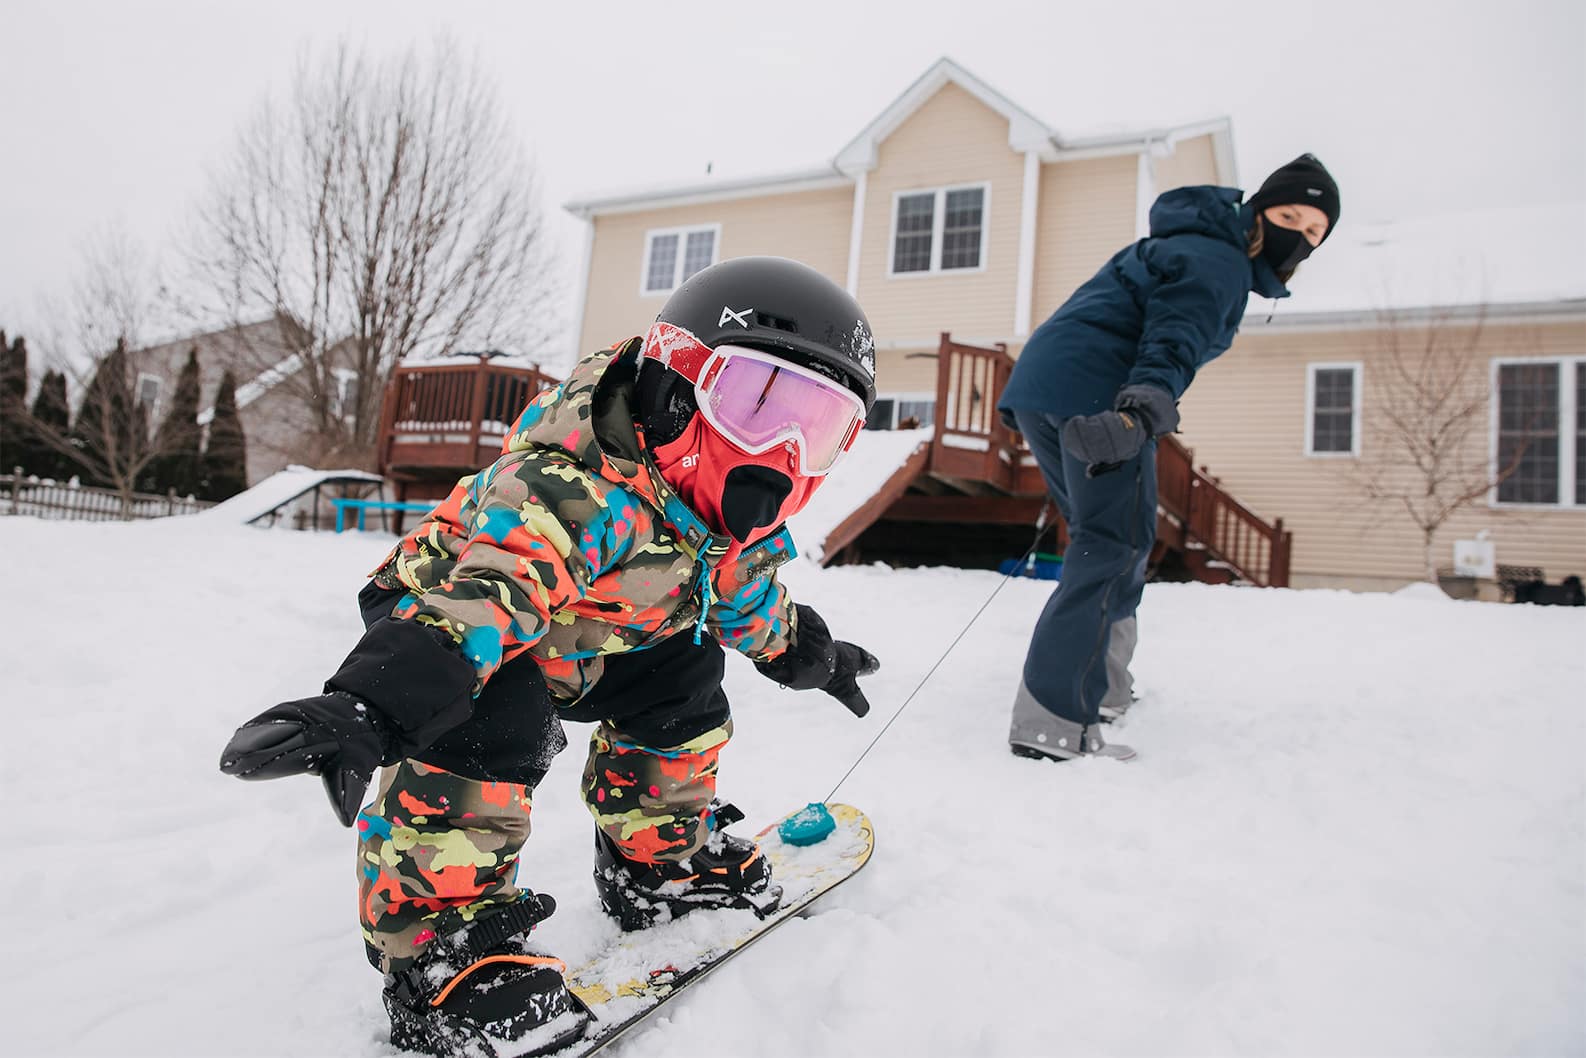 How to Make a Backyard Riglet Park for Kids at Home | Burton Snowboards